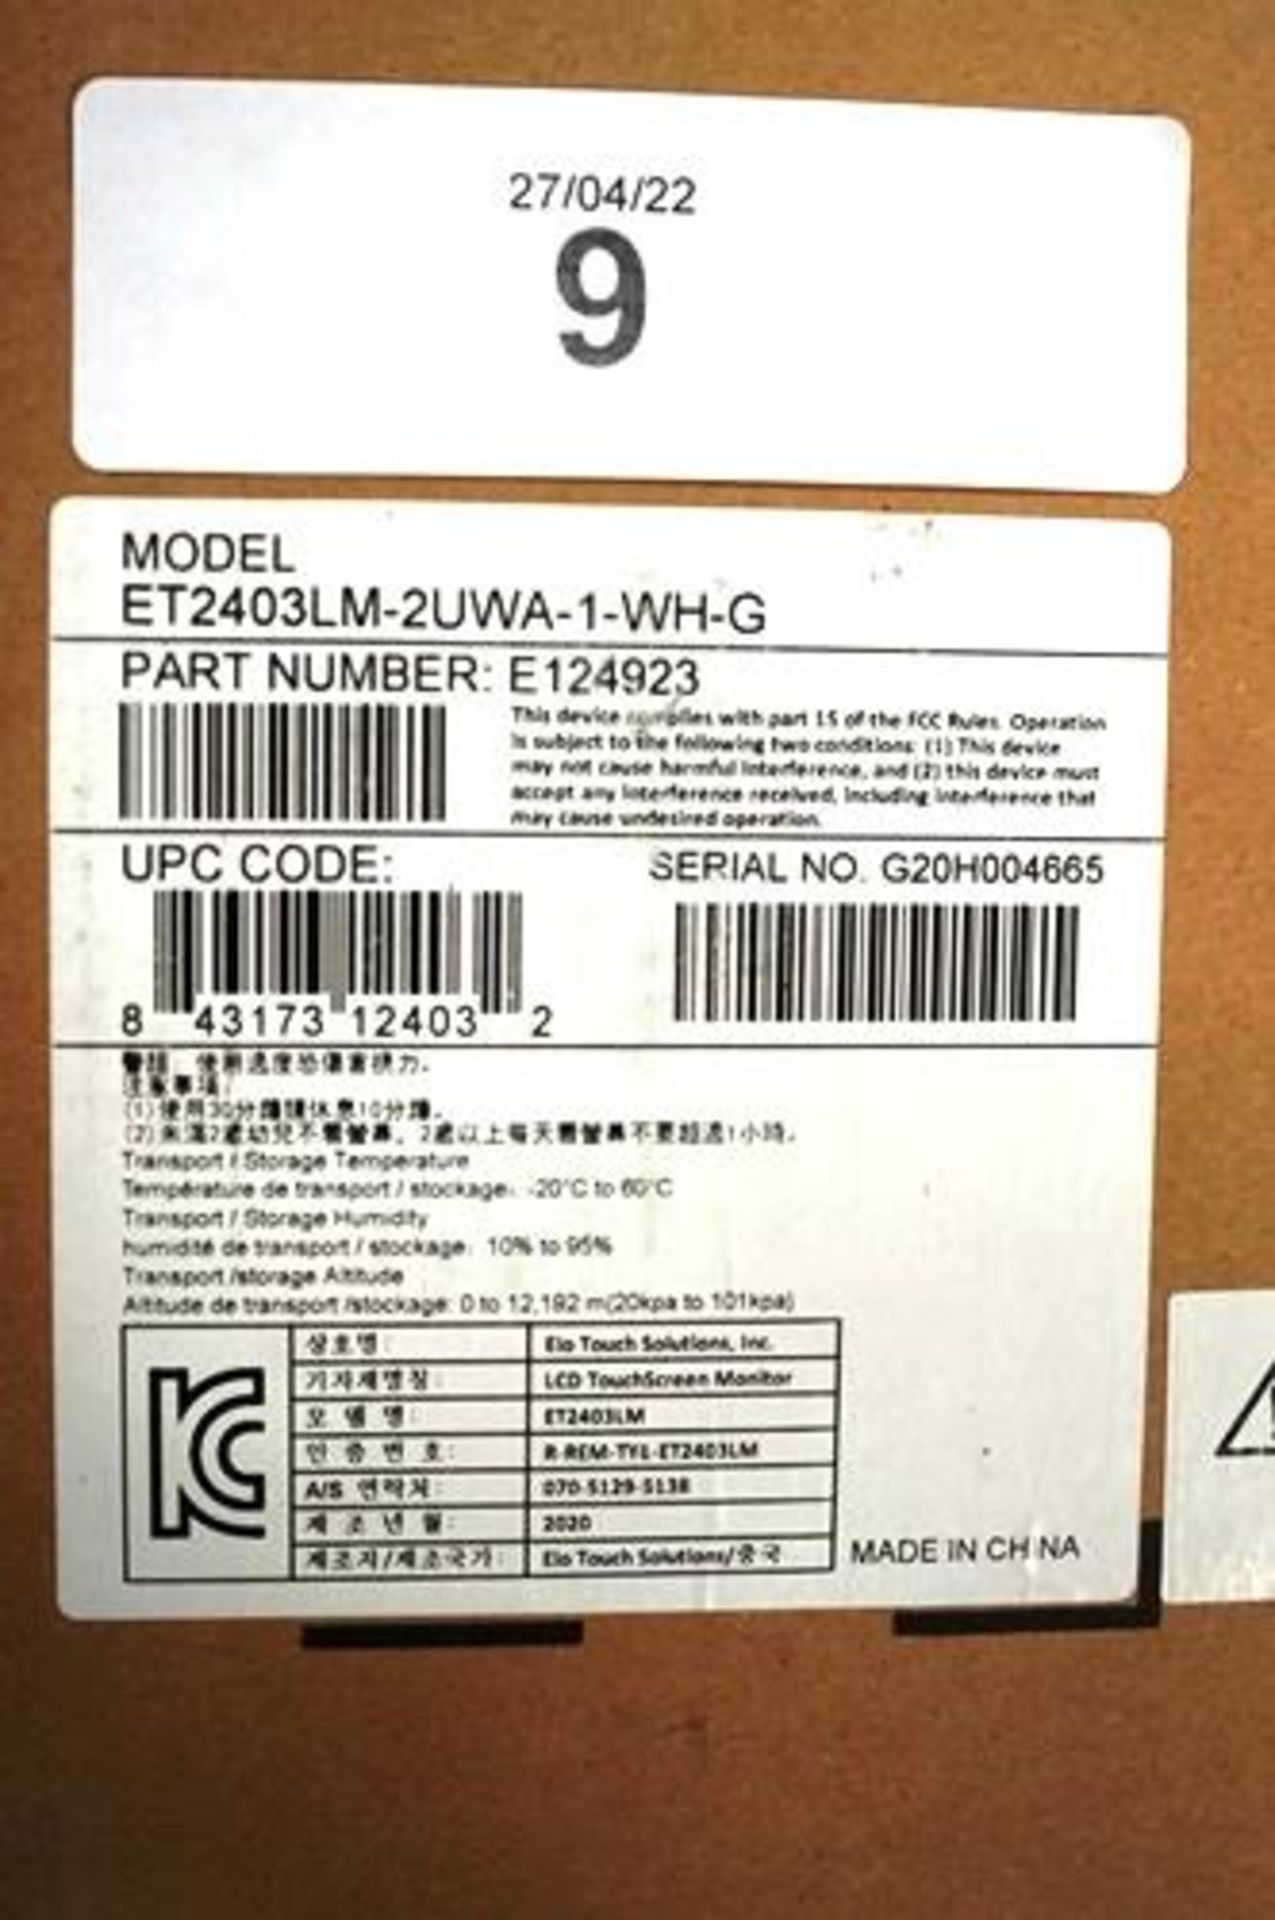 1 x Elo 24" touch screen monitor, model ET2403LM-2UWA-1-WH-G - New in box (ES1) - Image 2 of 2